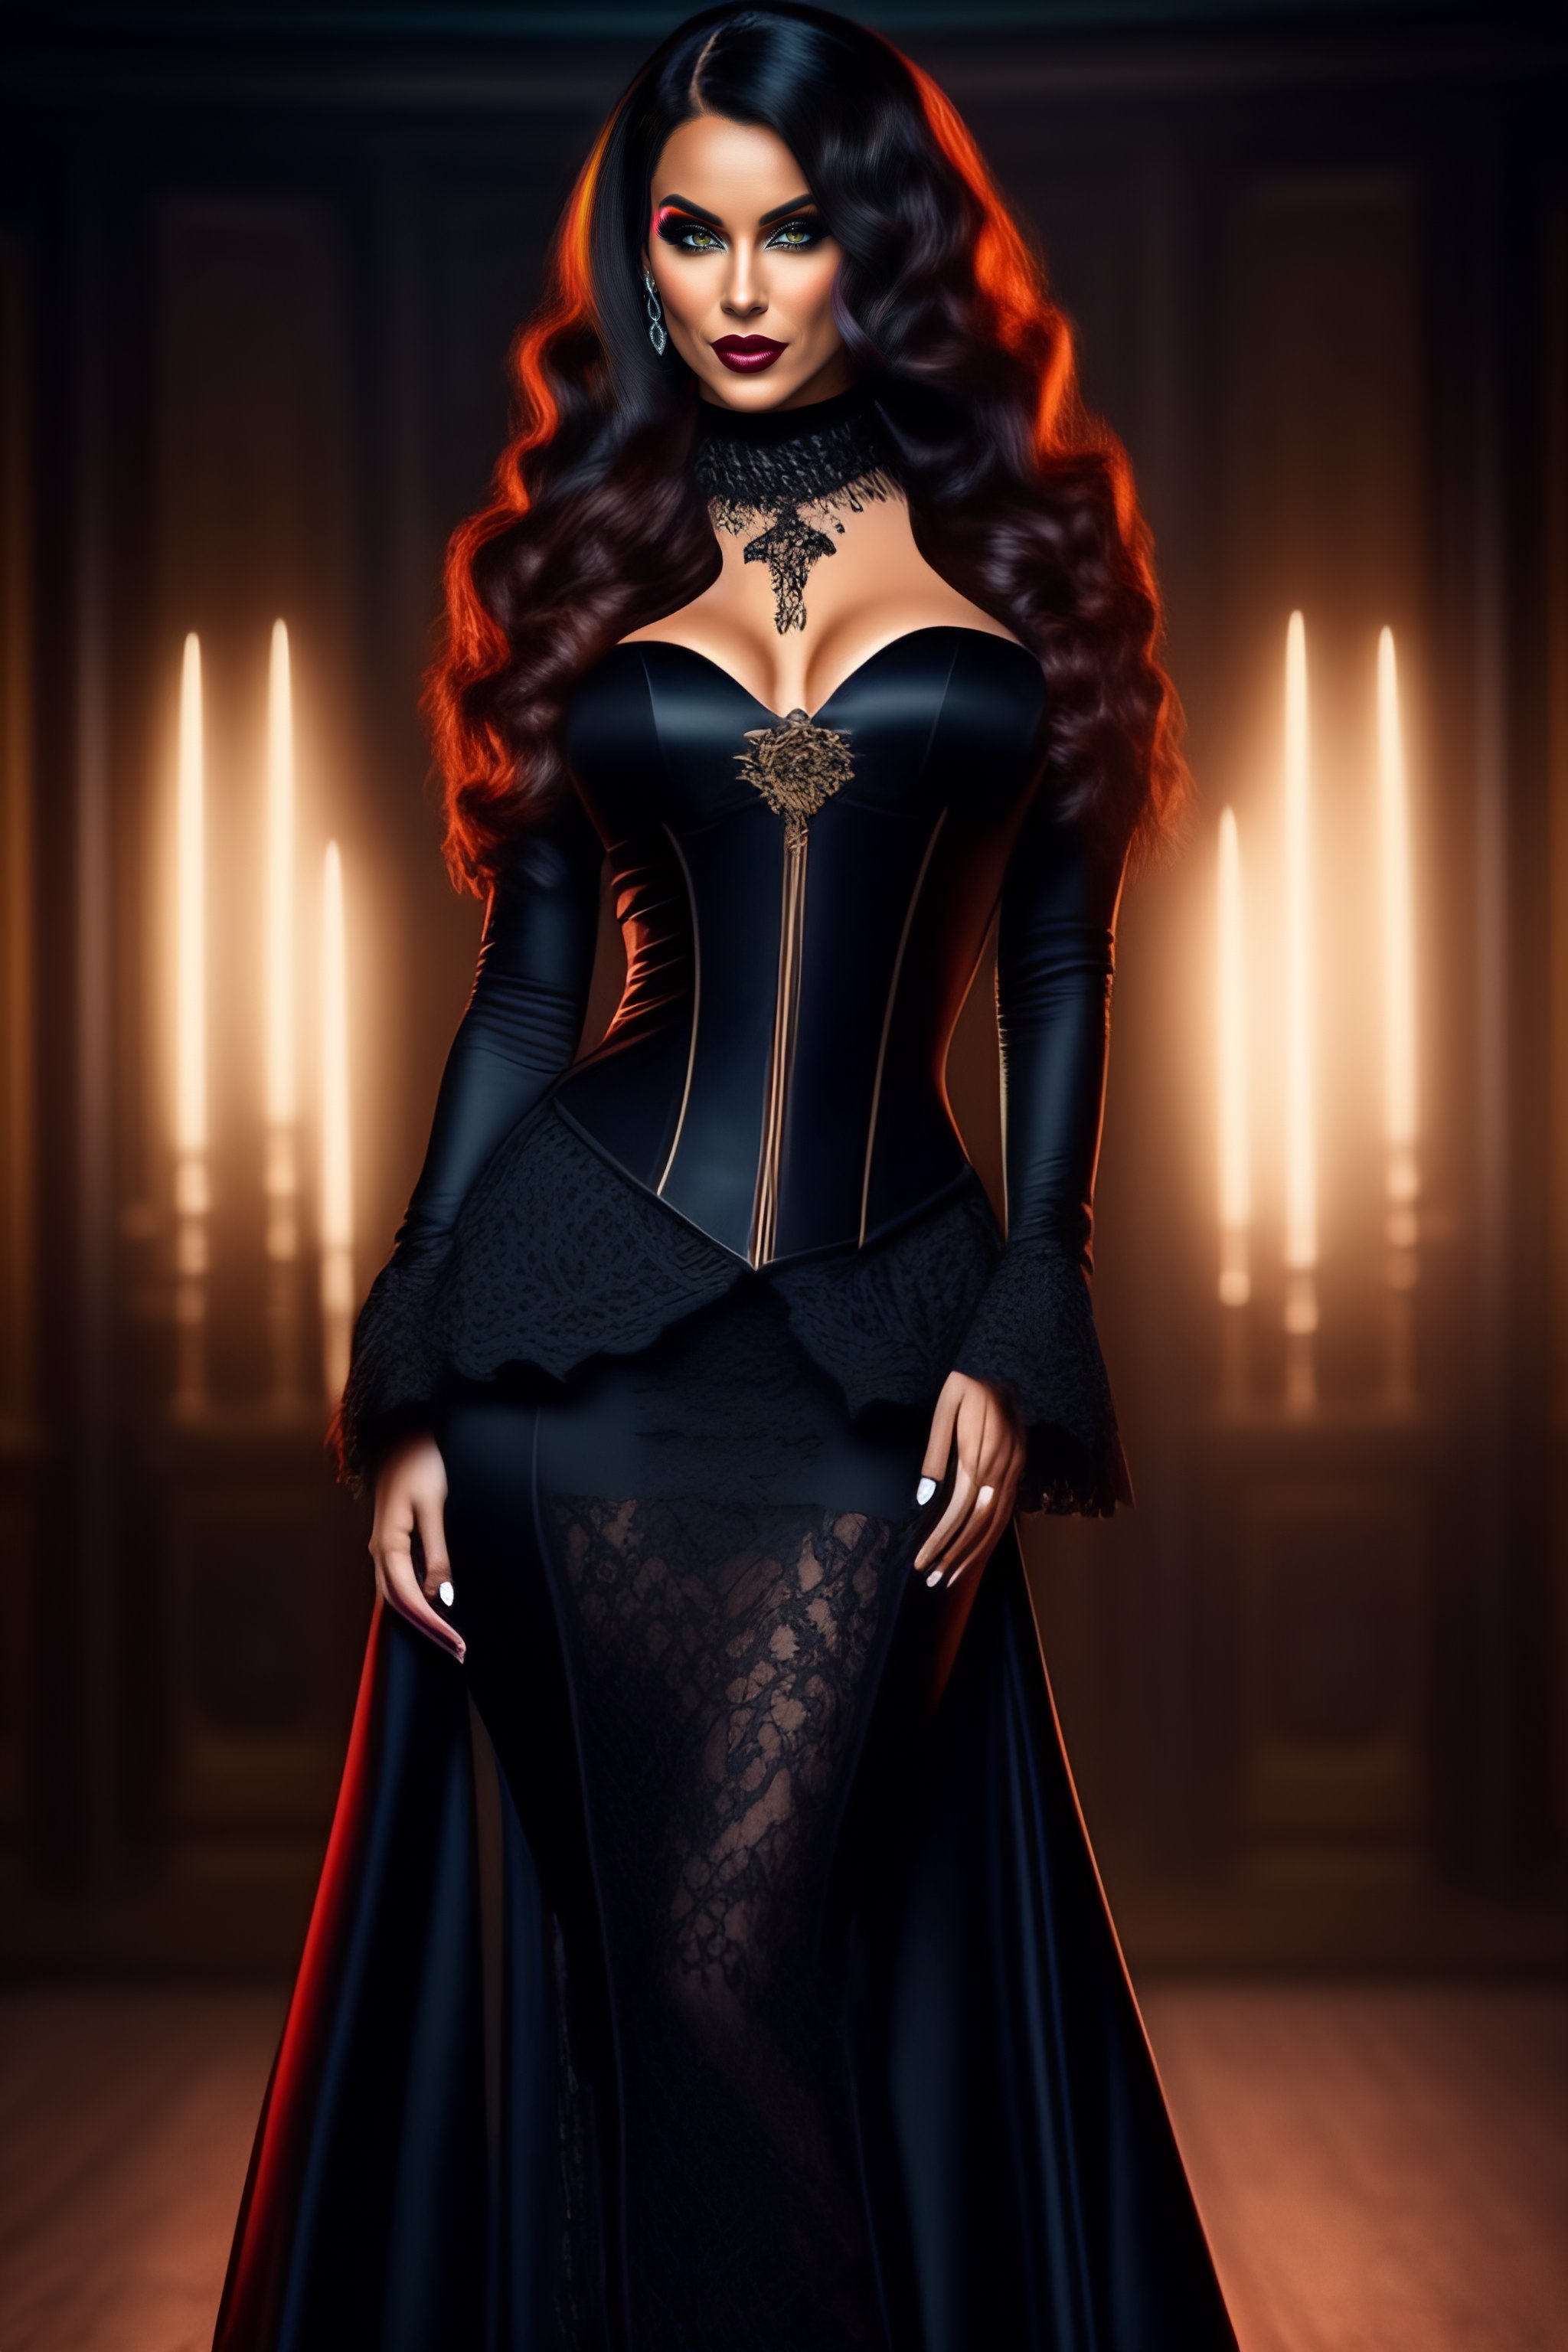 Lexica - Beautiful woman with bold and attractive features, wearing a corset,  gothic style and very tight clothing